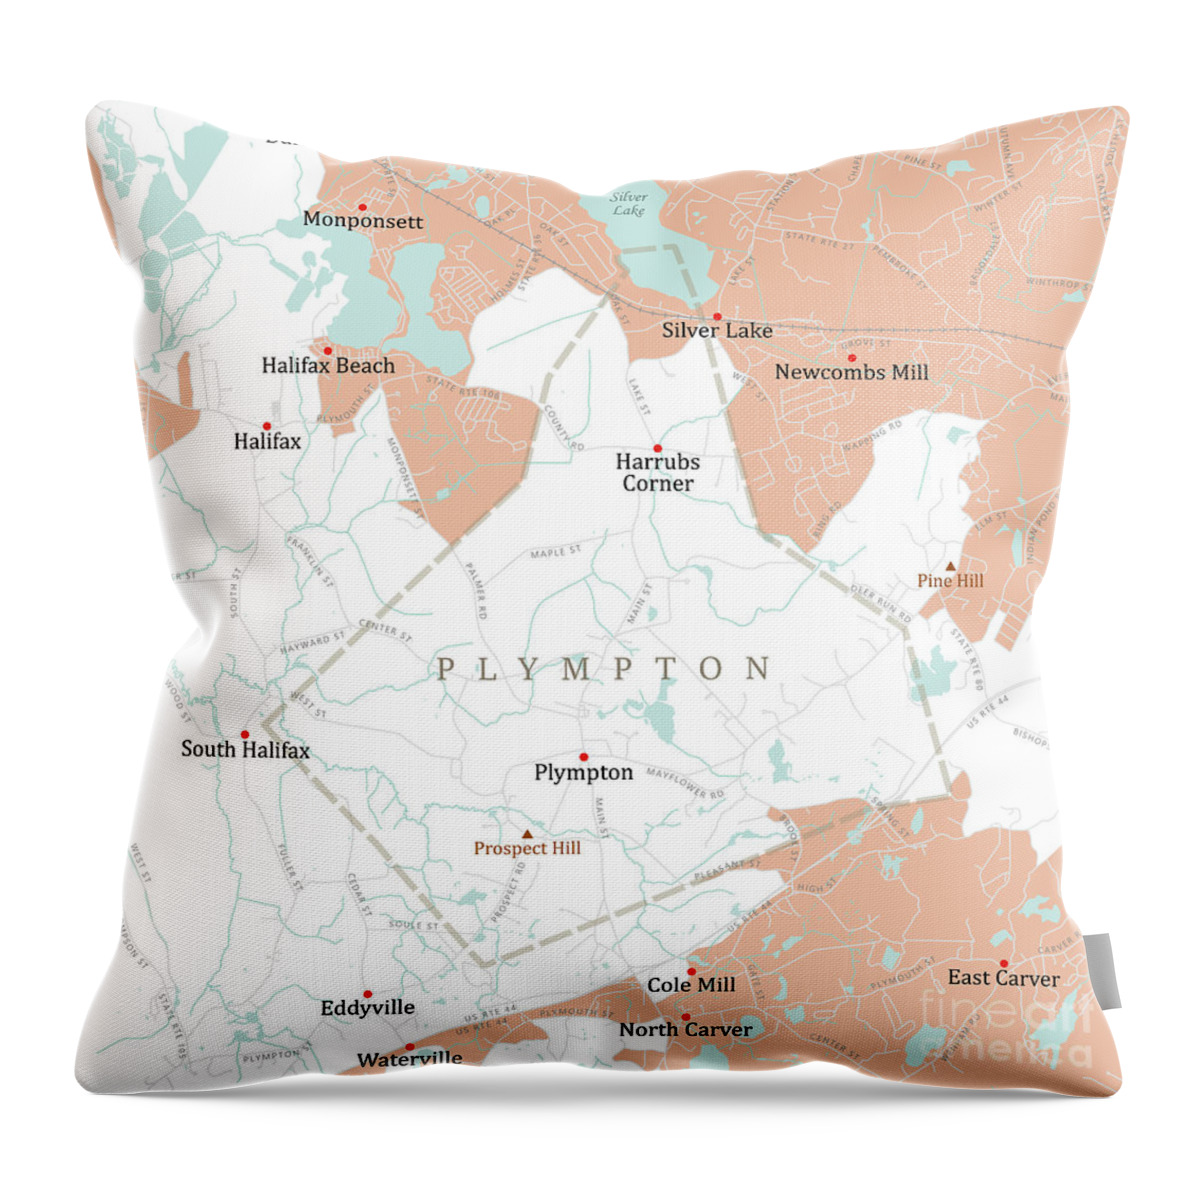 Massachusetts Throw Pillow featuring the digital art MA Plymouth Plympton Vector Road Map by Frank Ramspott